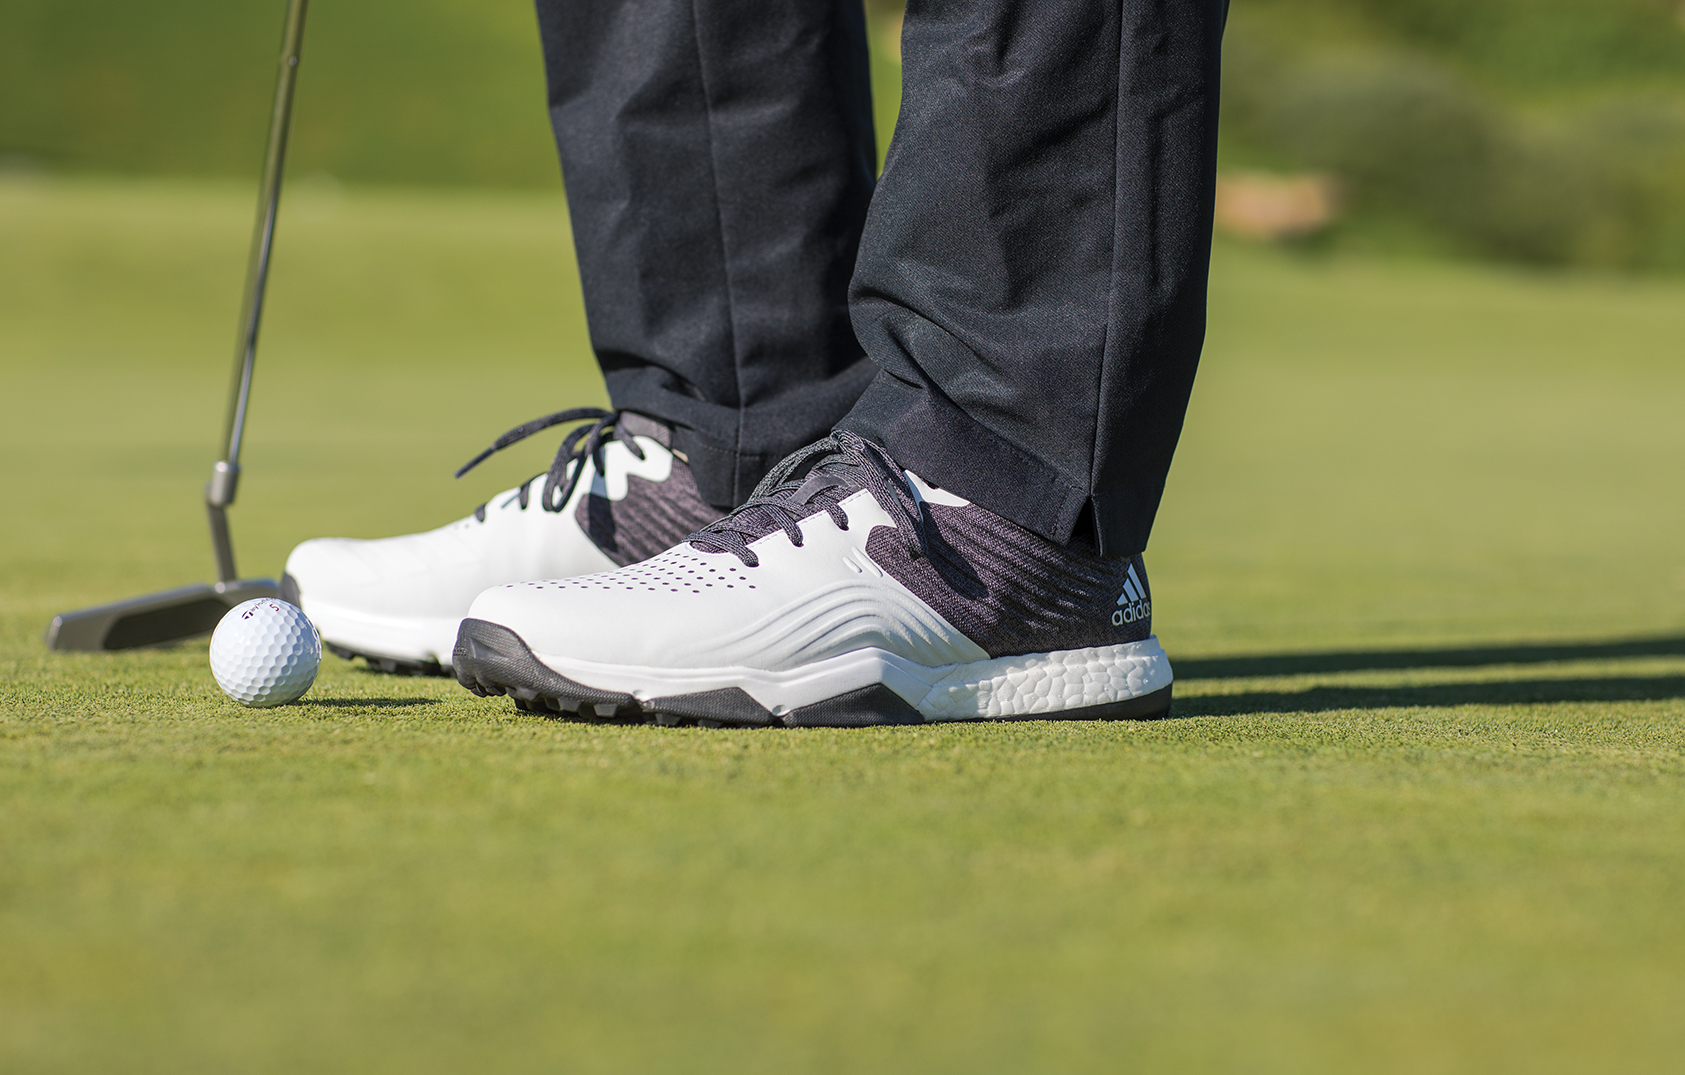 adidas adipower golf shoes review